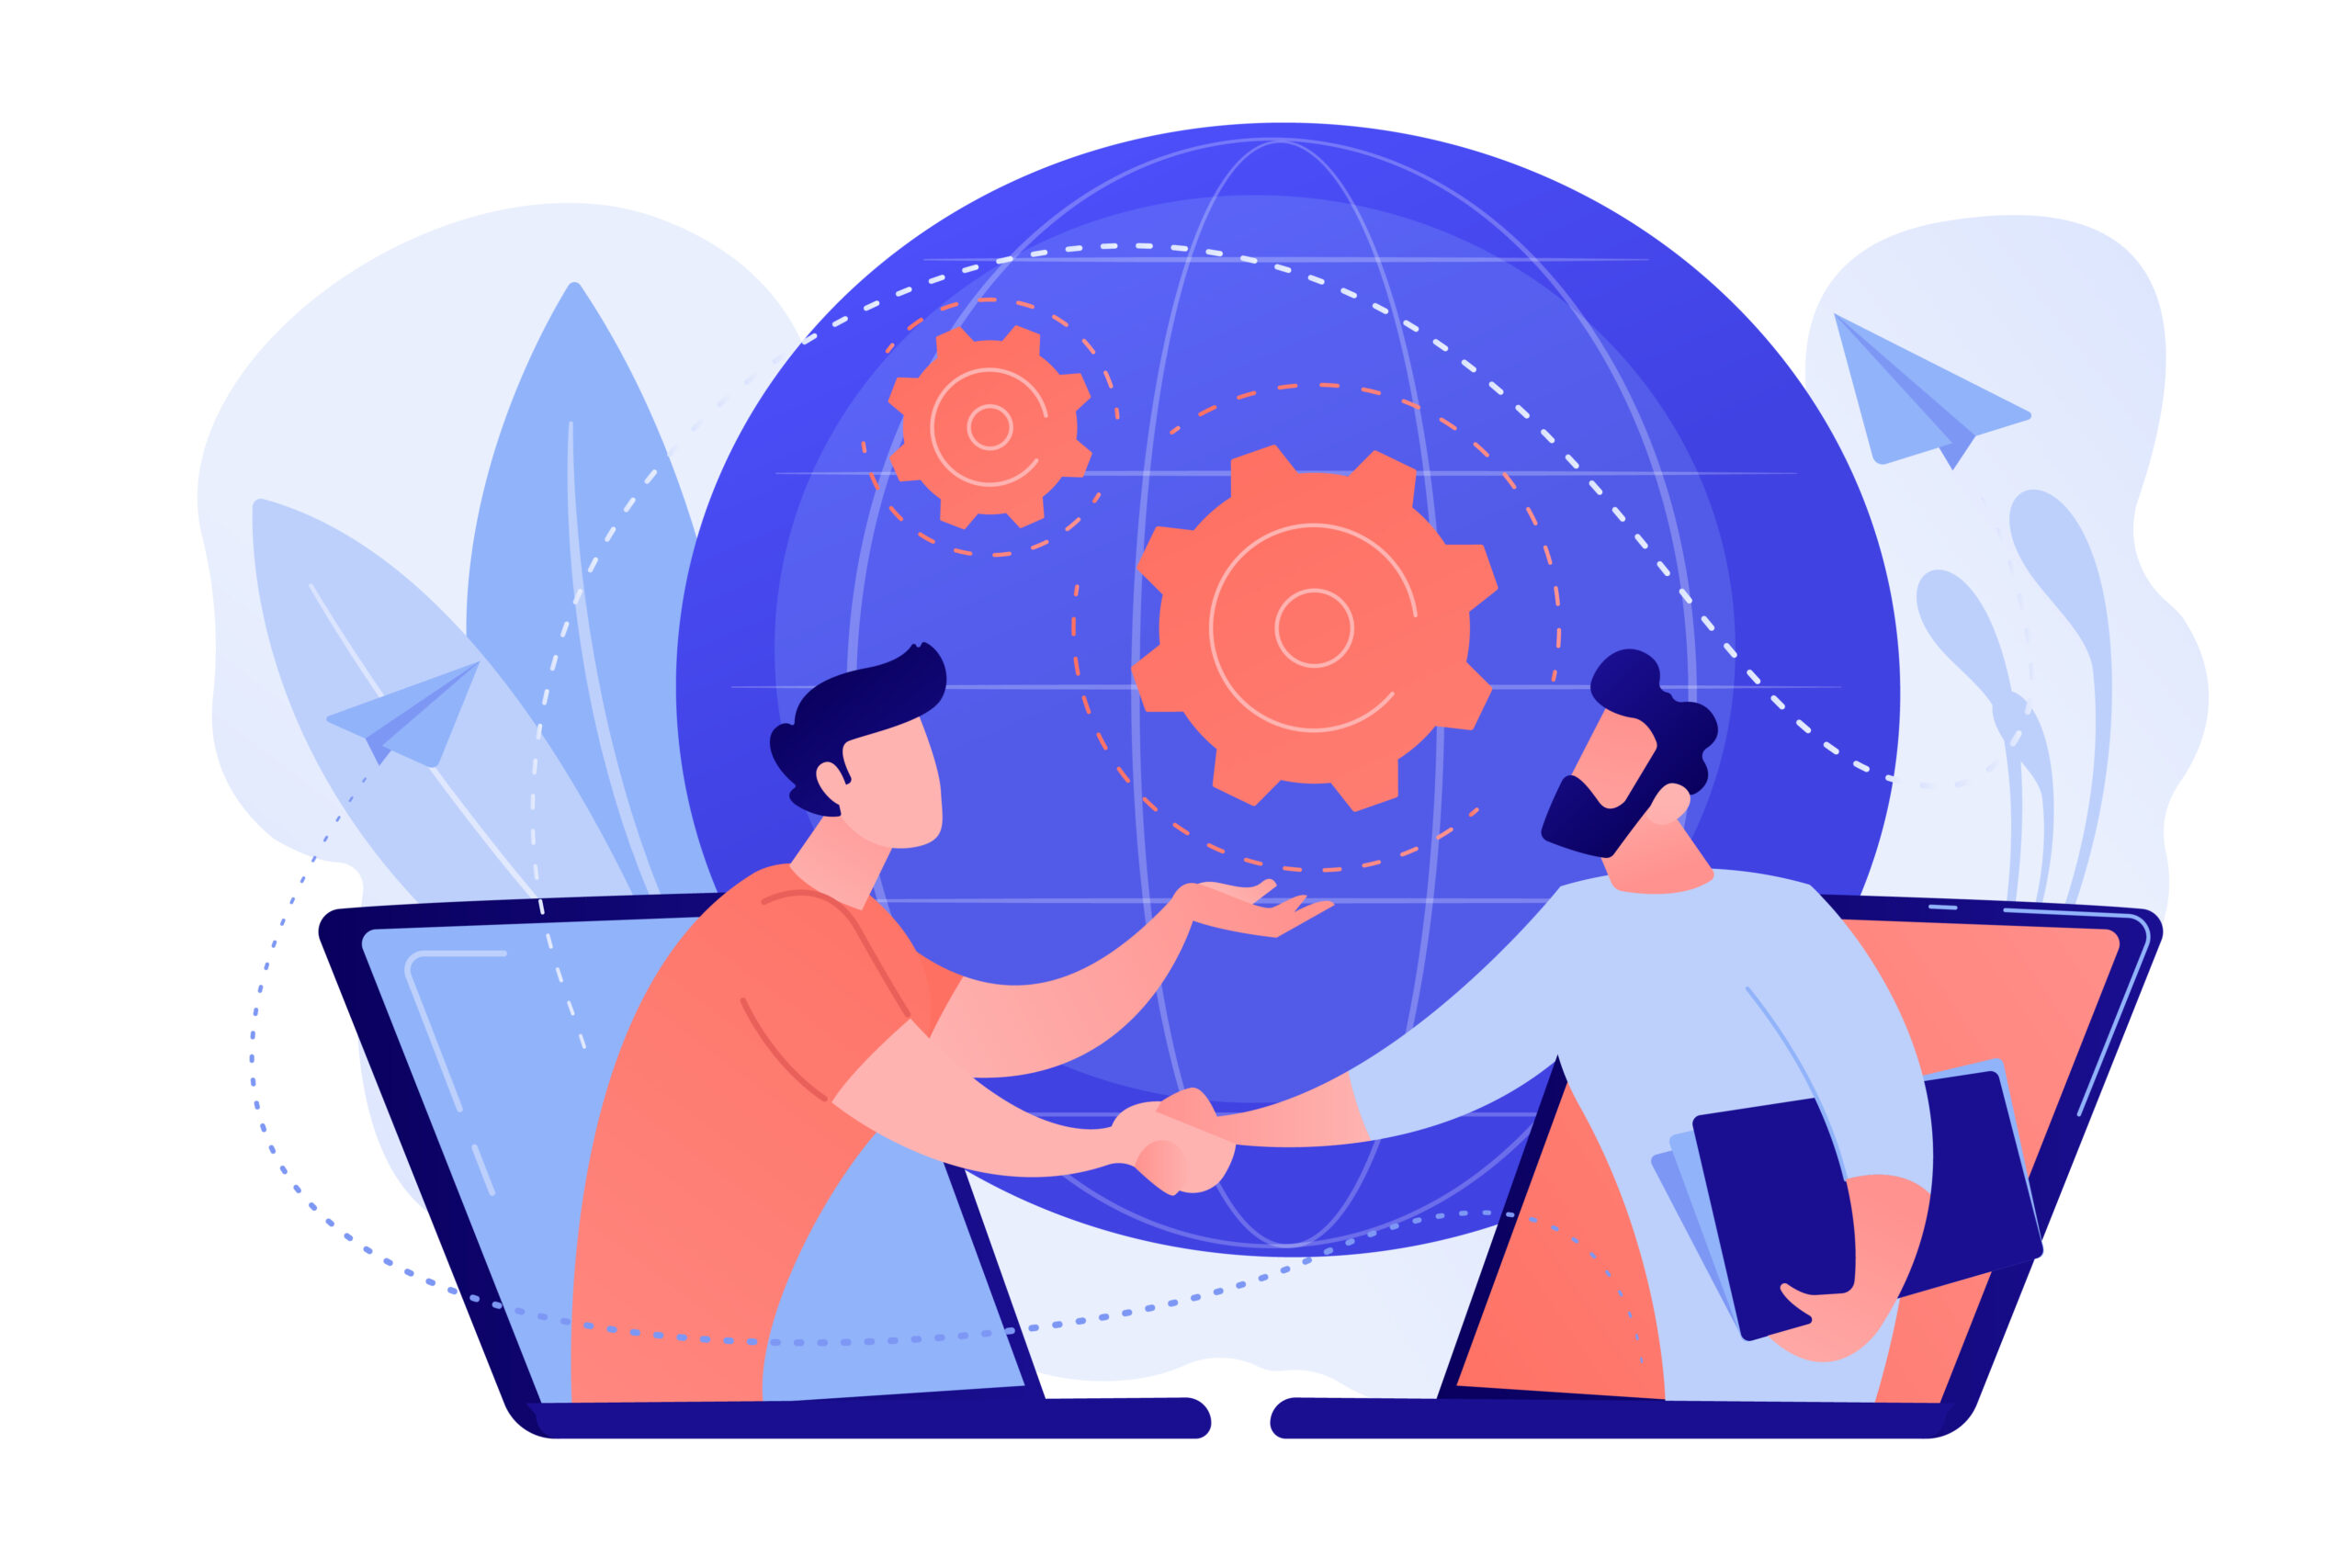 Businessmen shaking hands through laptop screens as online business, conference, meeting, network, deal, negotiations, agreement concept, pinkish coral blue palette. Vector illustration on white background.